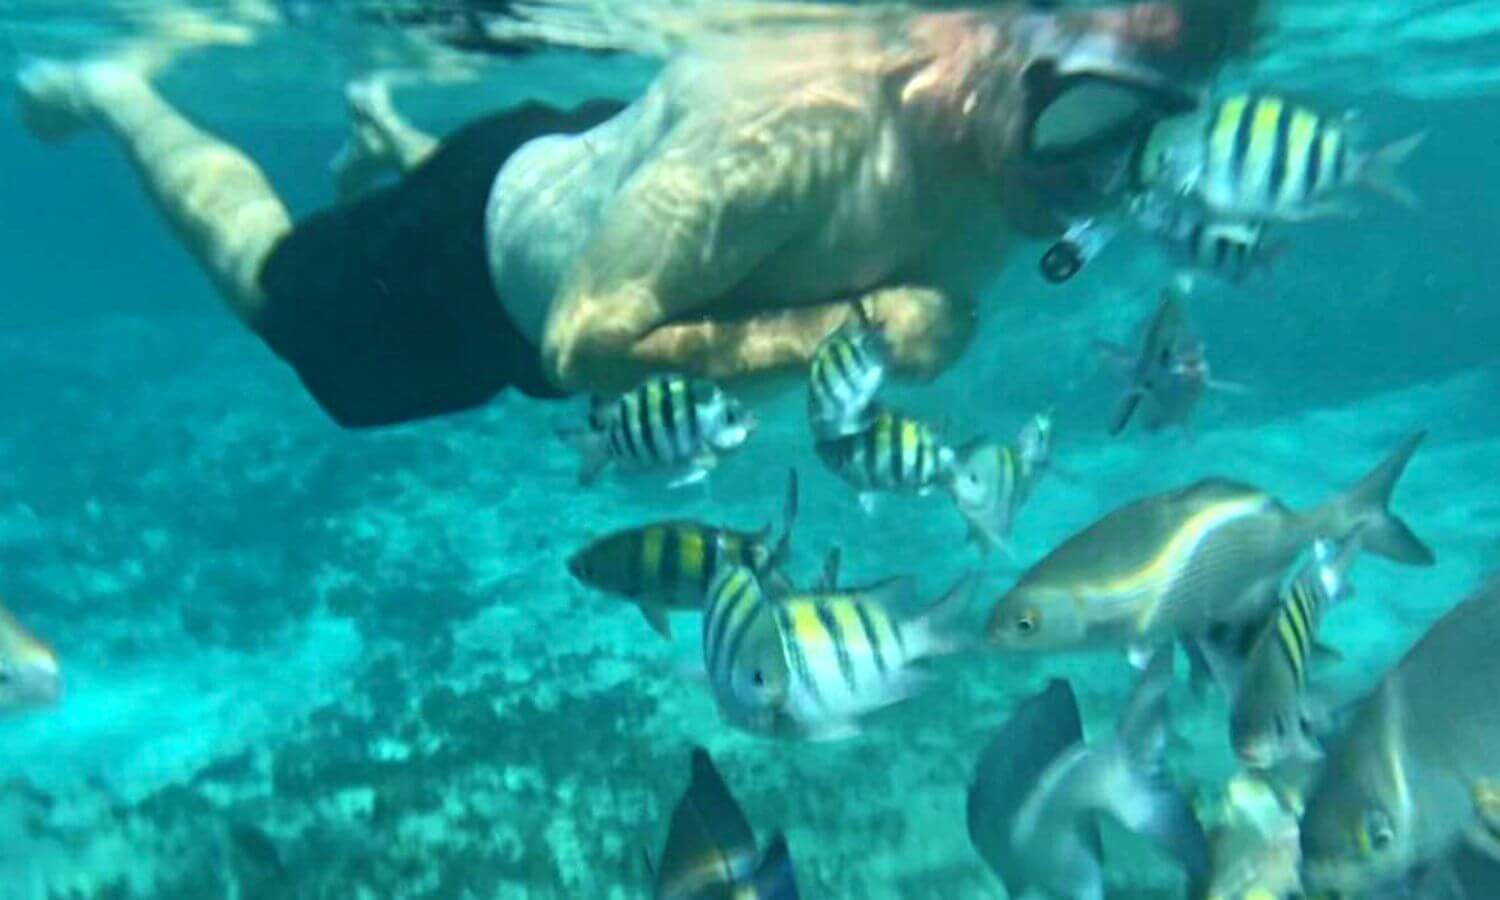 Jim snorkeling with reef fish at Cozumel